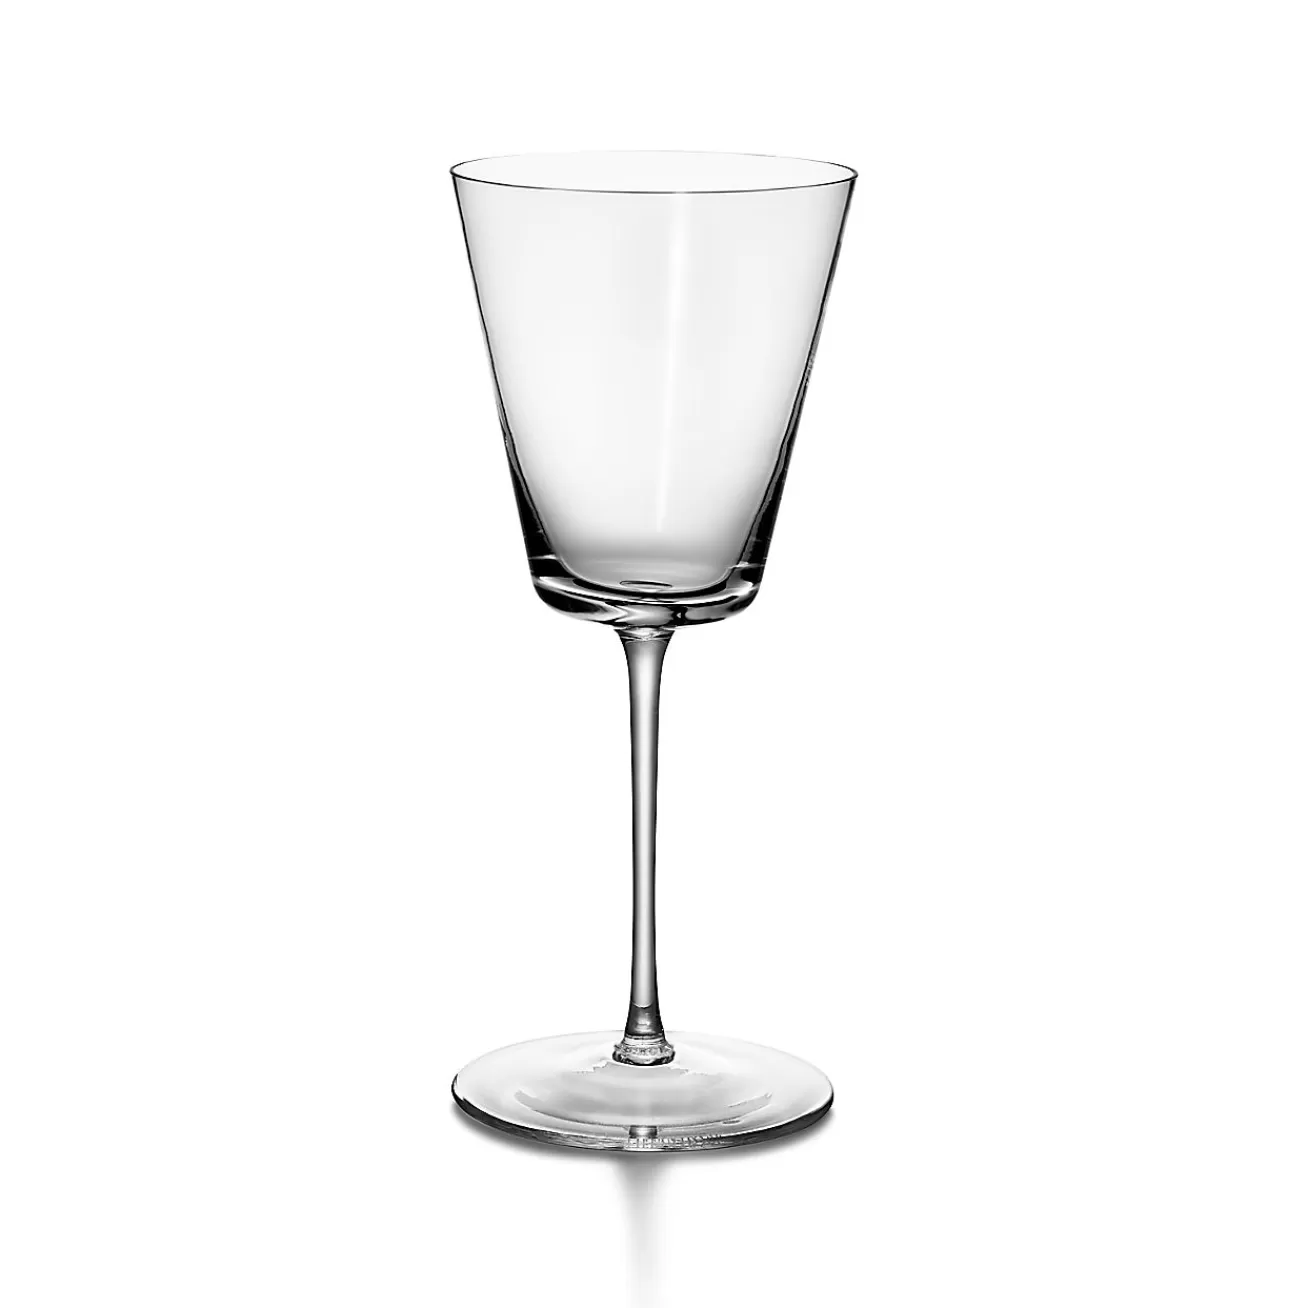 Tiffany & Co. Tiffany Moderne Bordeaux Wine Glass in Glass | ^ The Home | Housewarming Gifts